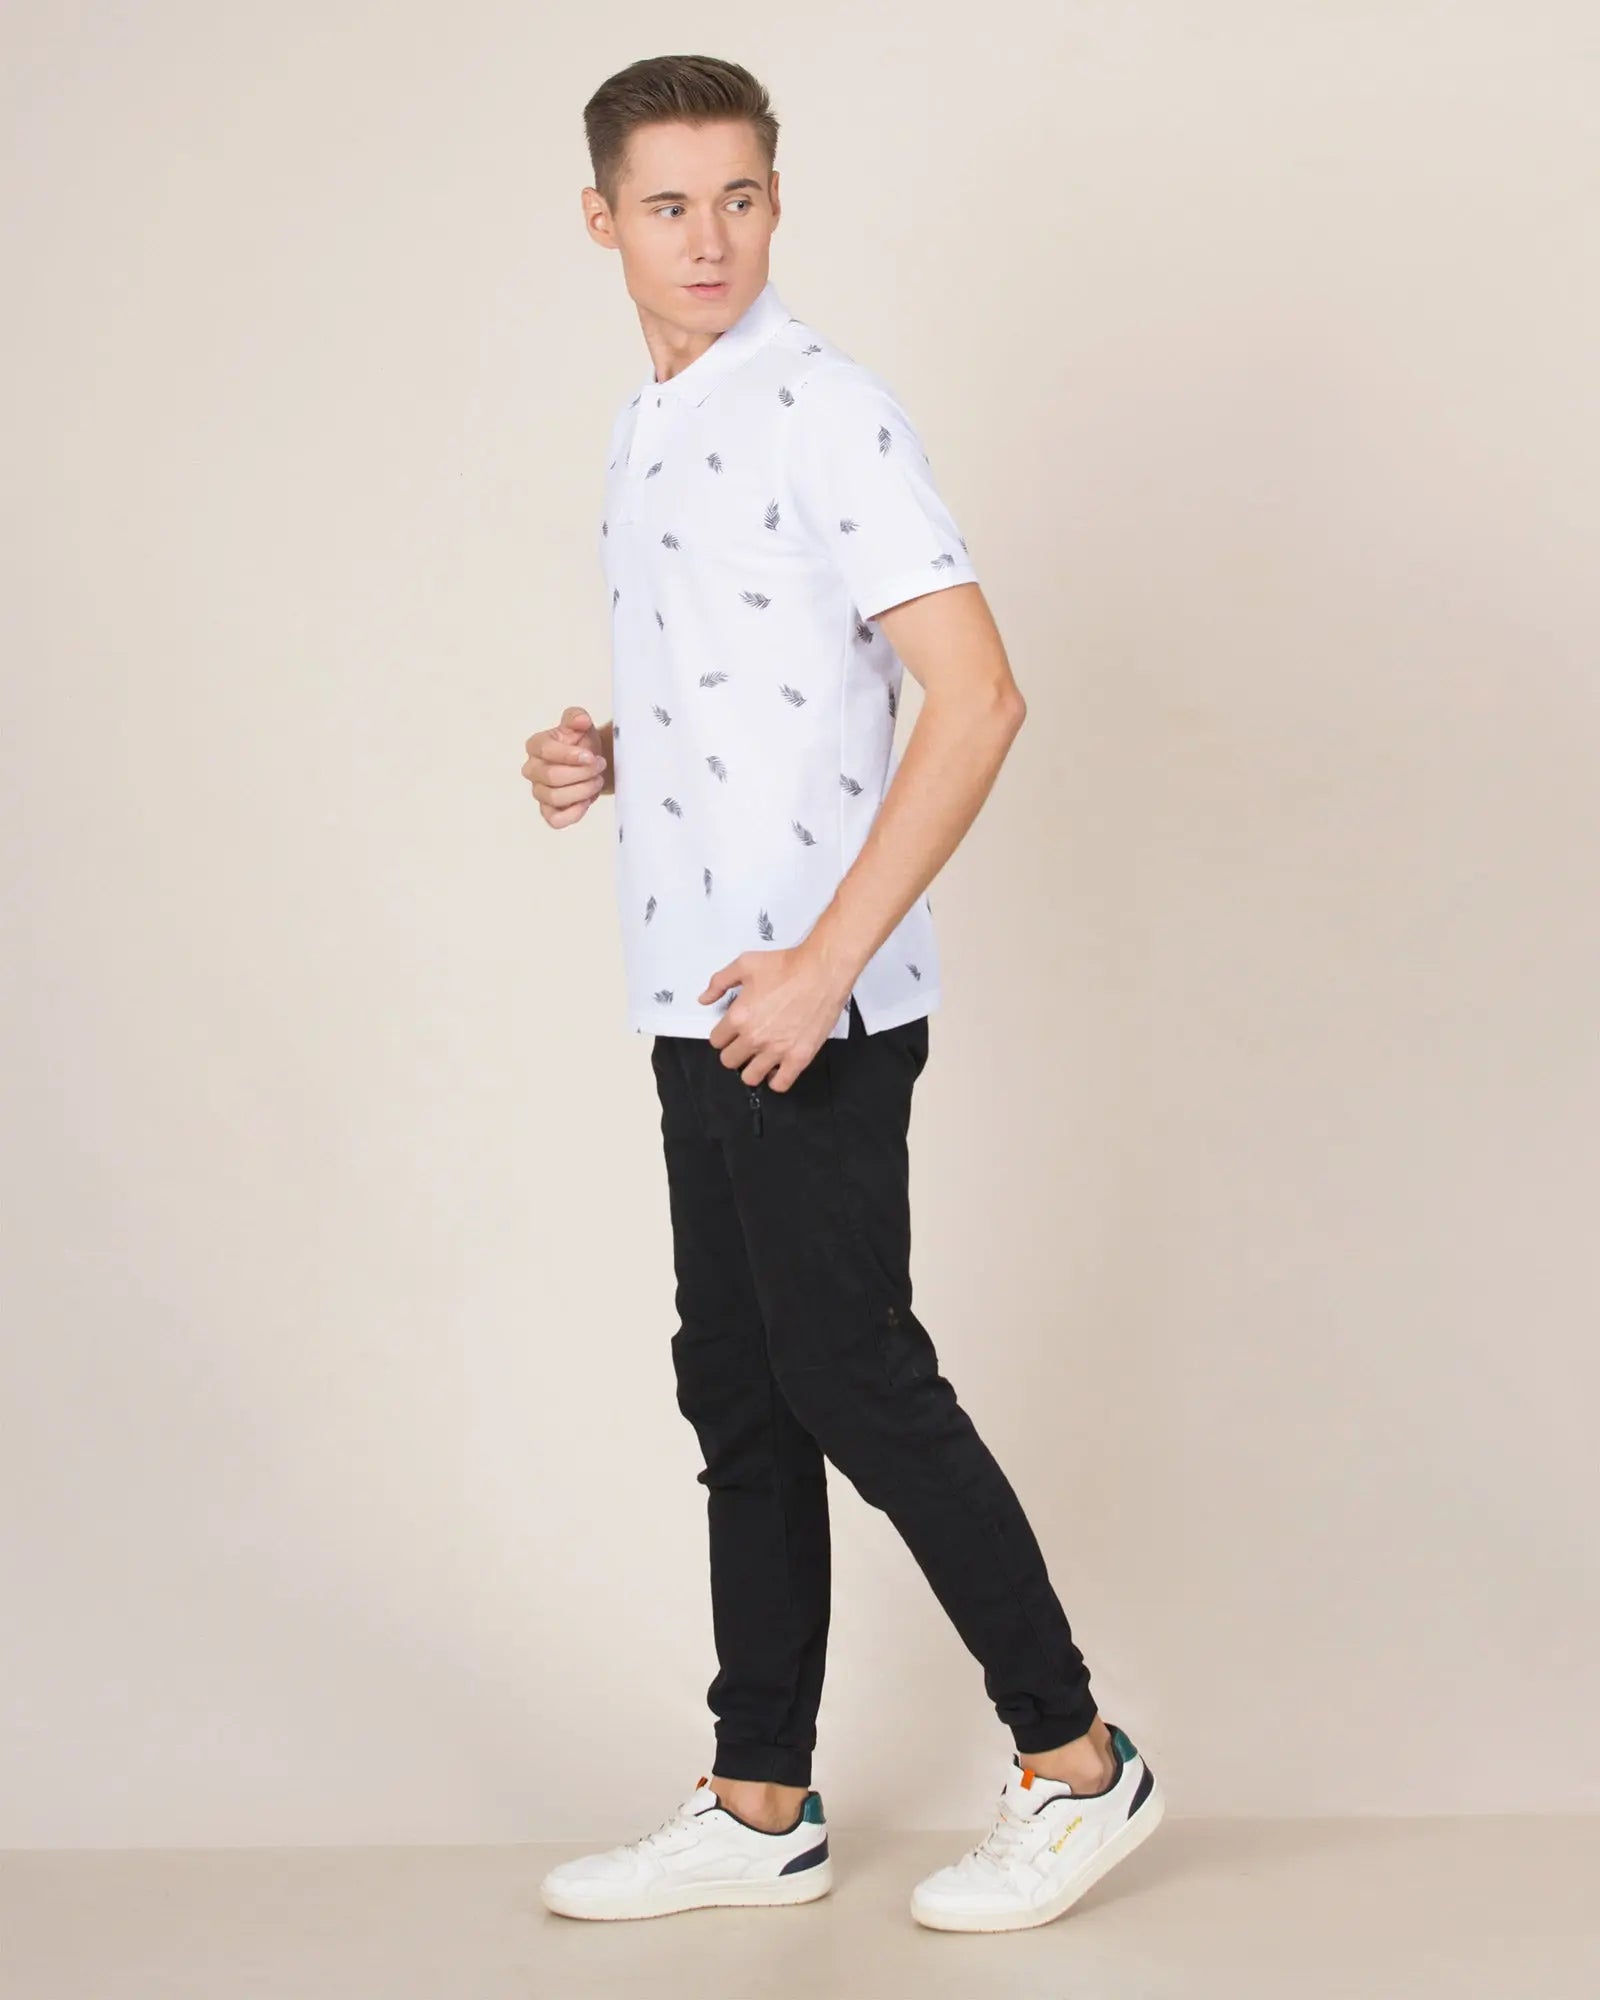 LCY London | Art of Summer - Tropical Inspired Printed Men&#39;s Short Sleeved Polo Shirt LCY London